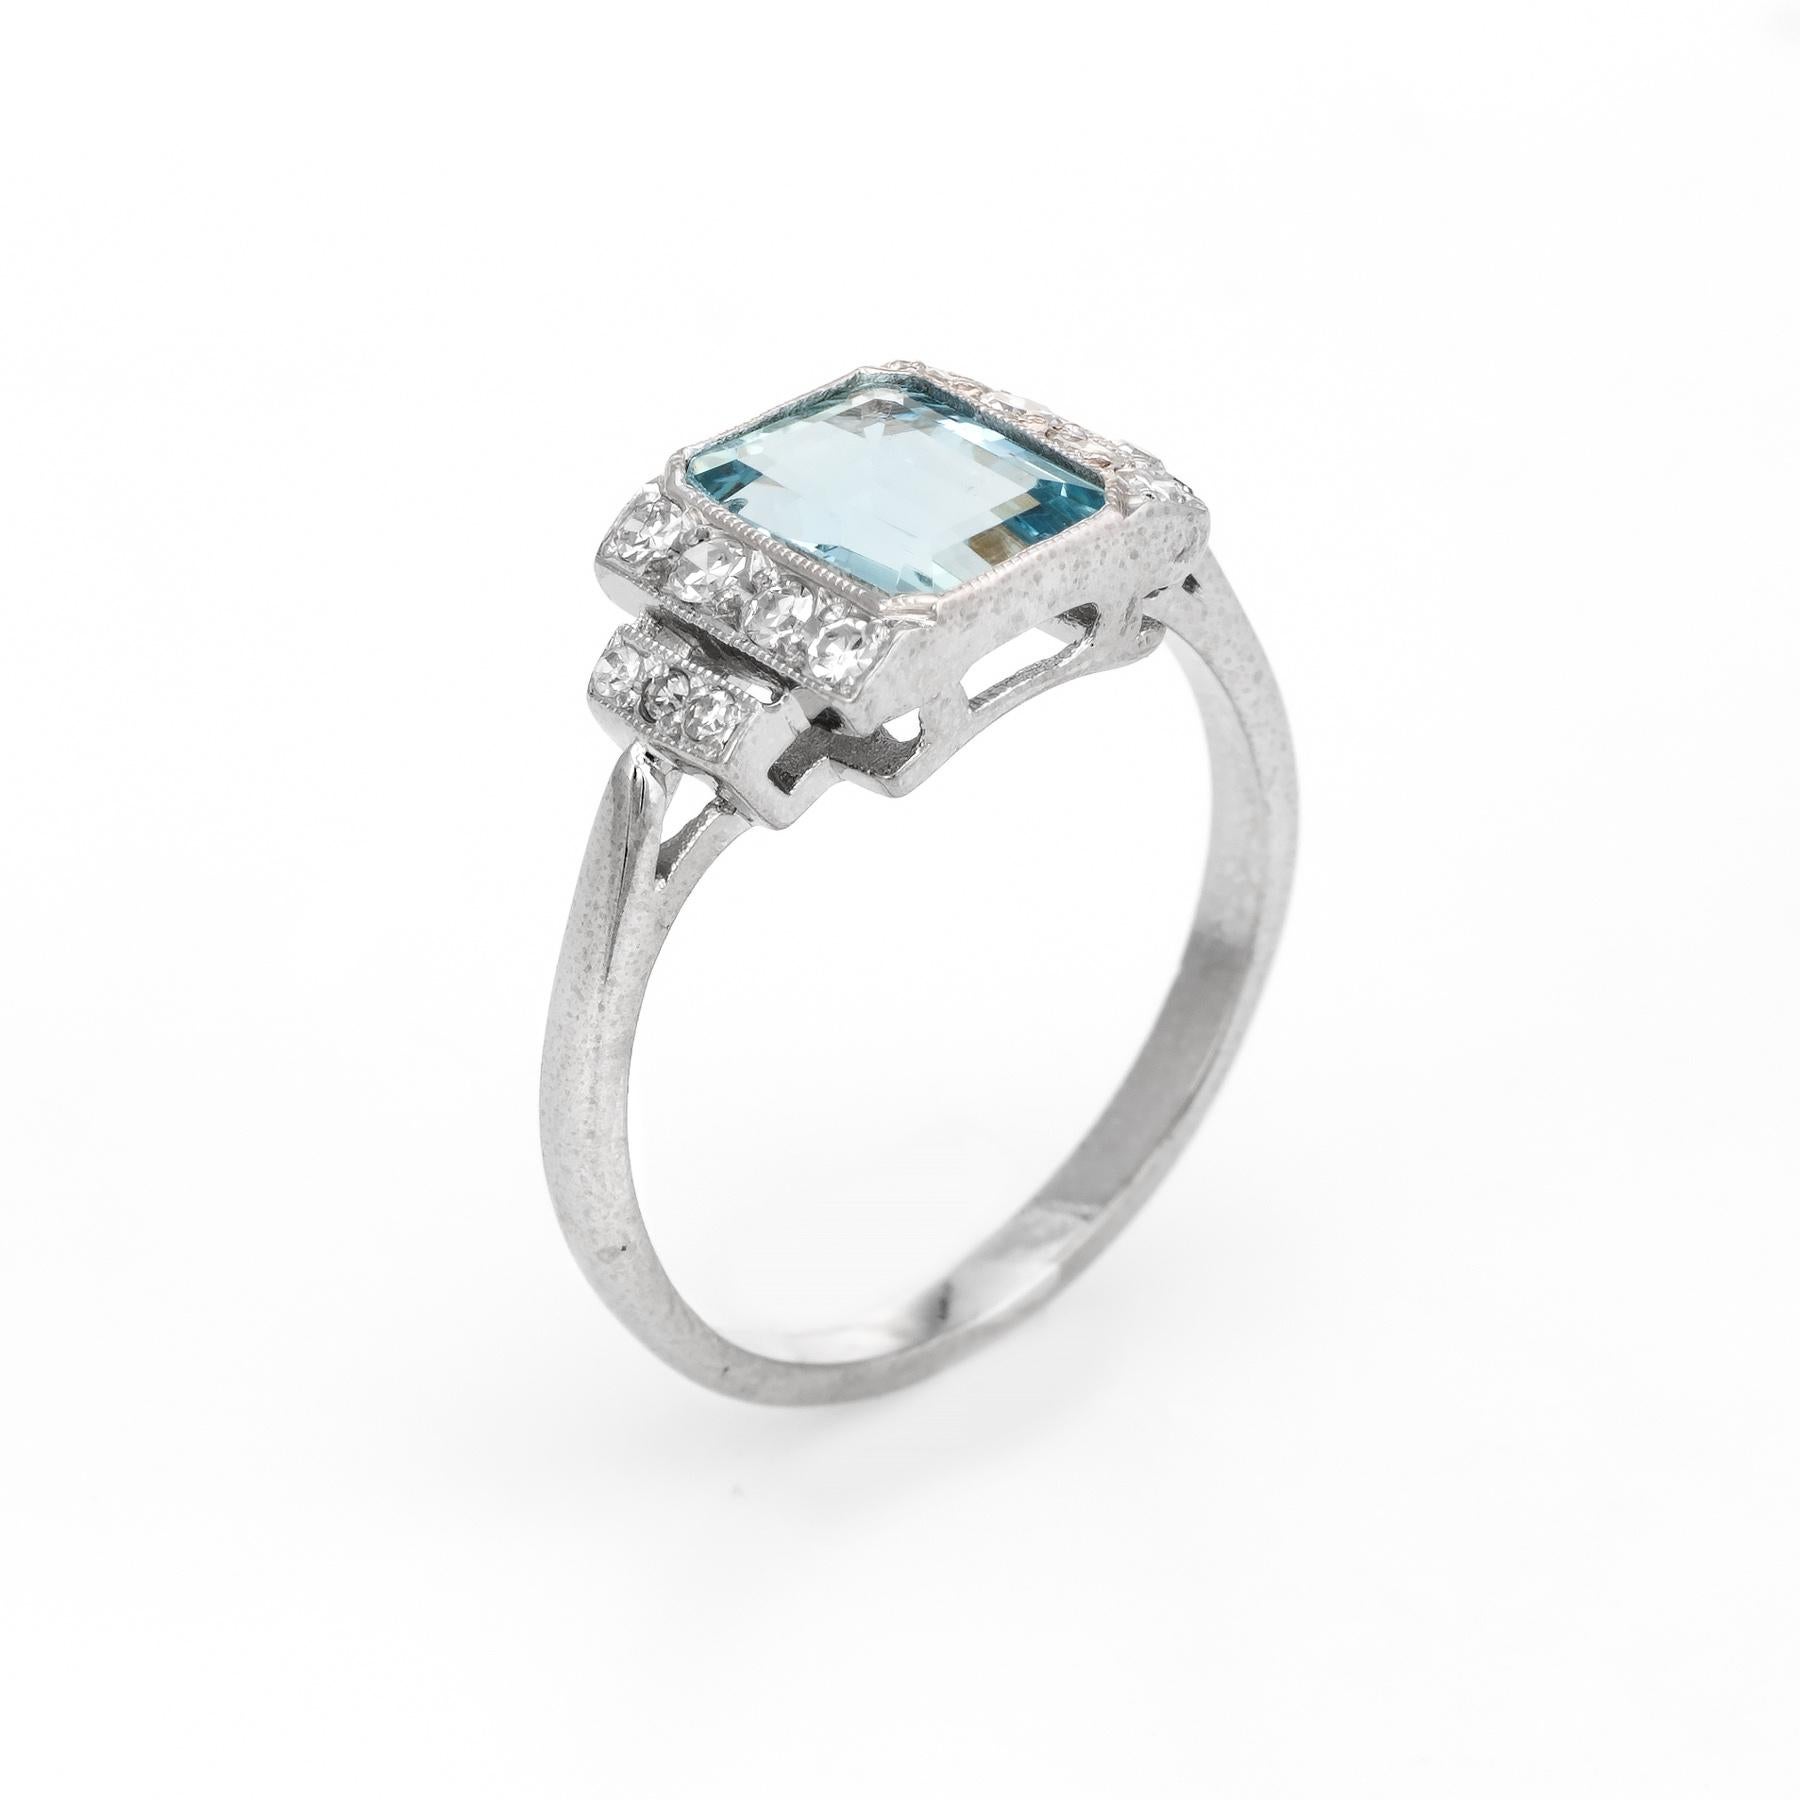 Elegant & finely detailed Art Deco era ring (circa 1920s to 1930s), crafted in 18 karat white gold. 

Centrally mounted aquamarine measures 8mm x 6mm (estimated at 1.50 carats), accented with 14 single cut diamonds totaling an estimated 0.22 carats